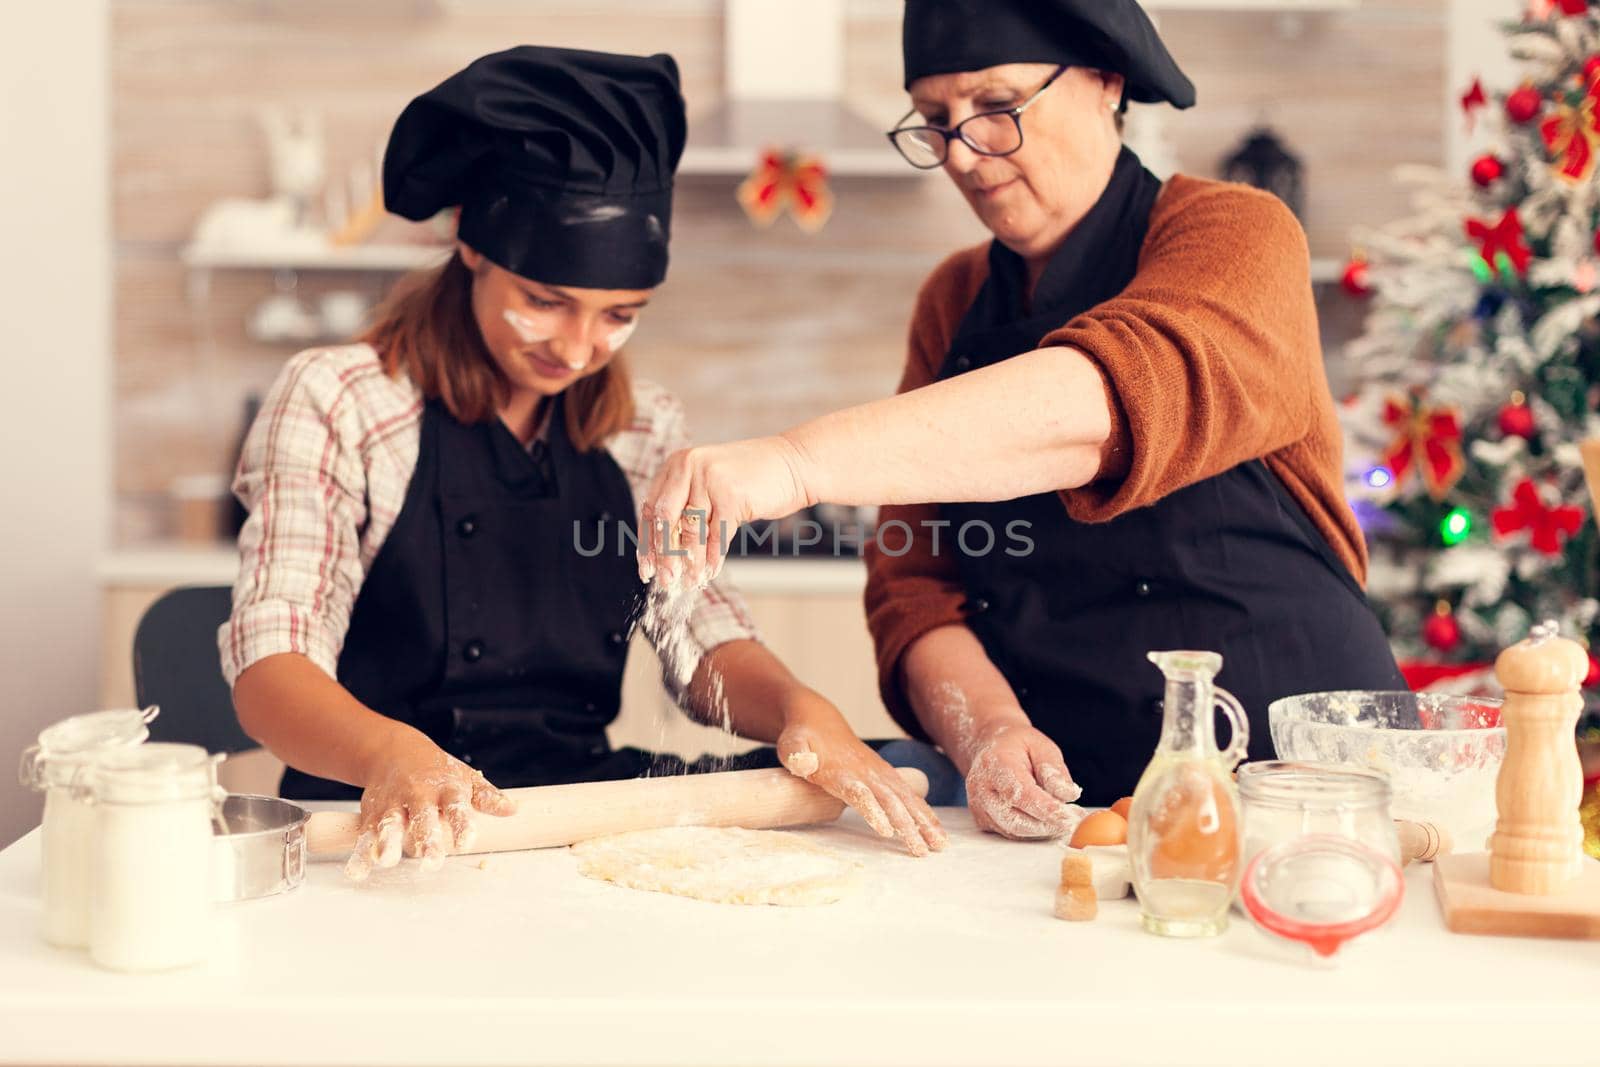 Grandmother wearing apron on christmas day spreading flour by DCStudio